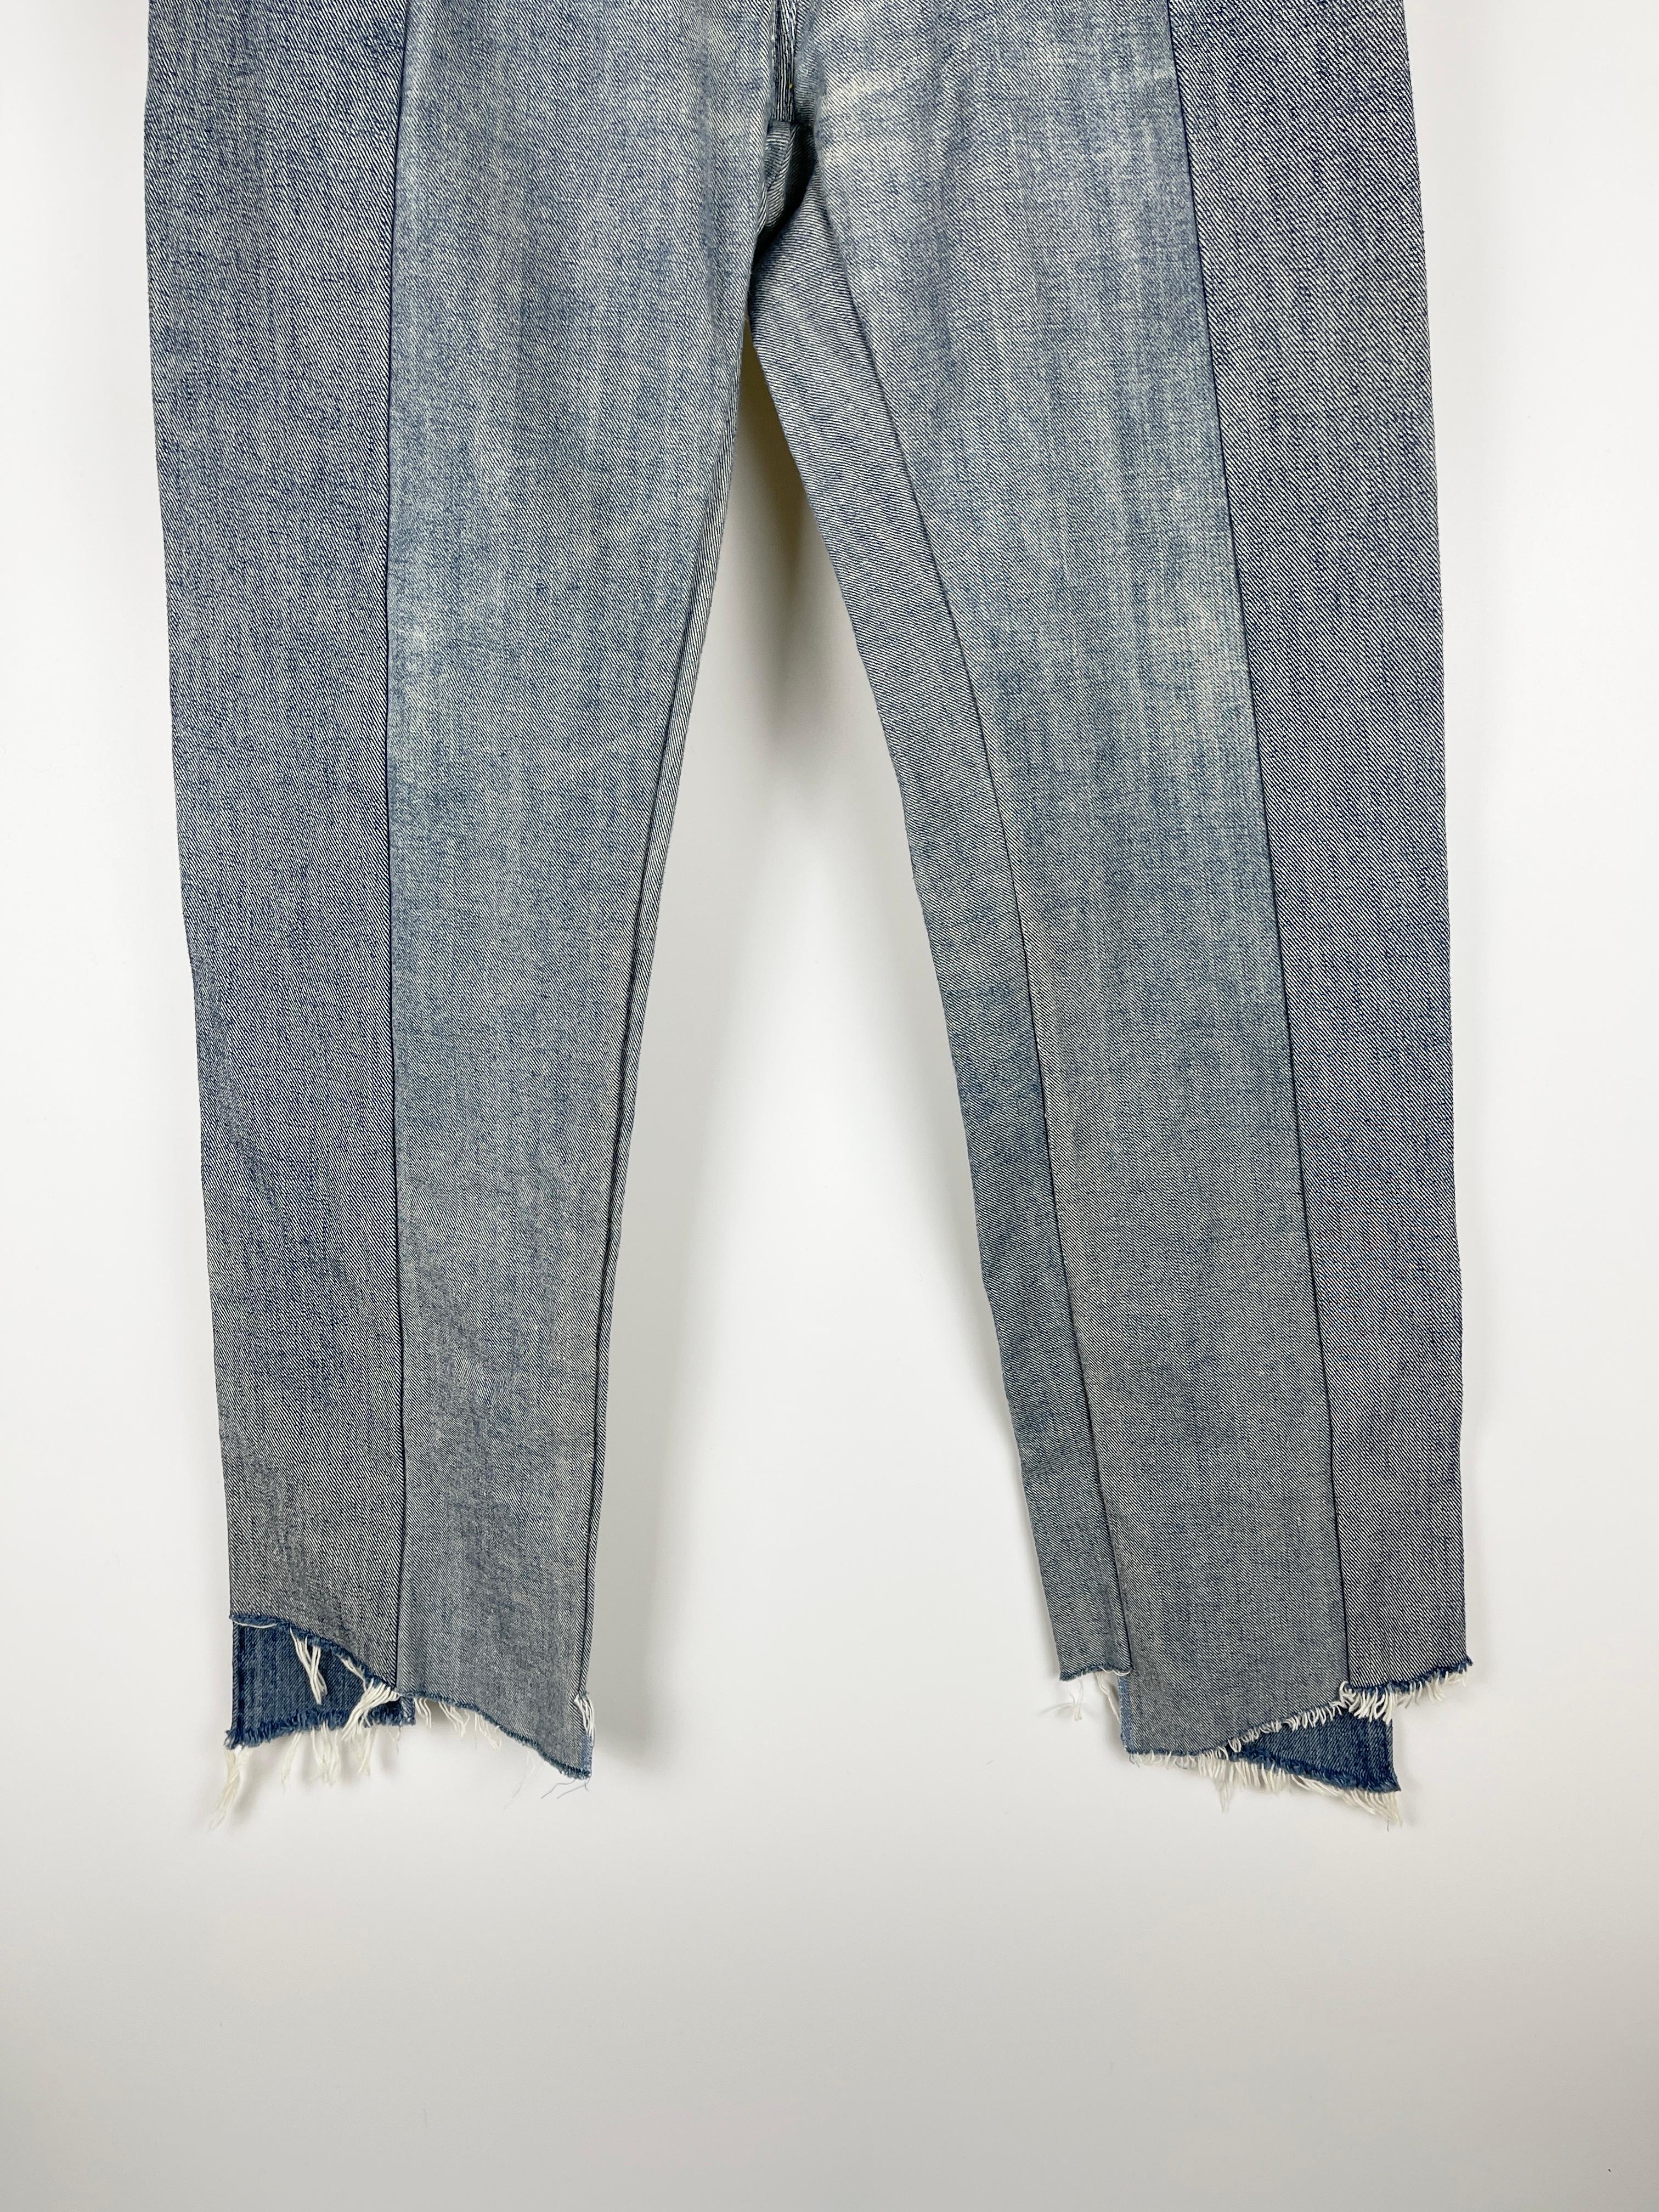 Vetements x Levi's 2017 Reworked Jeans For Sale 6